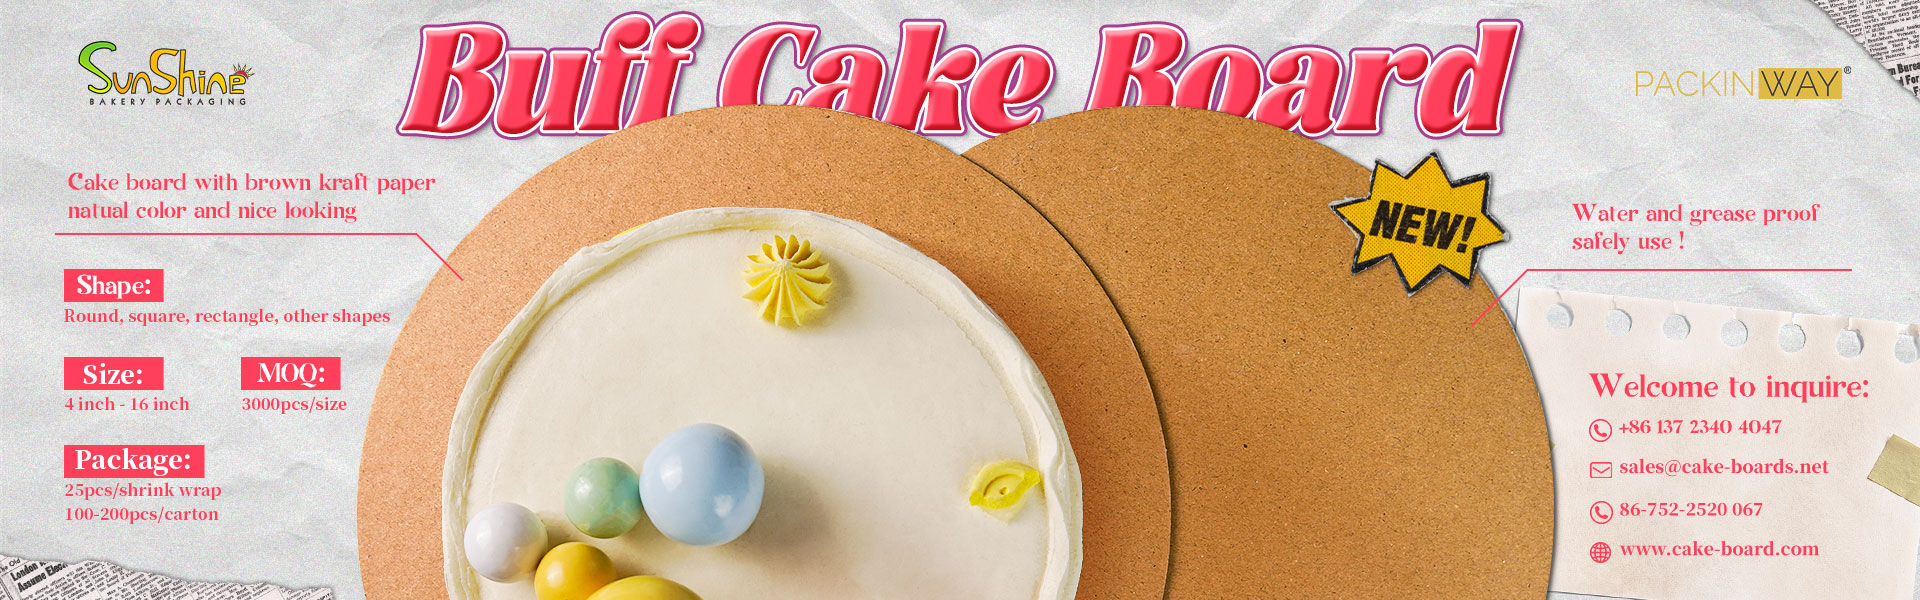 How to make a ribbon bow for cake boards : Super easy cake bow for cake  drums | More information : https://meadowbrownbakery.com/how-to-make -a-ribbon-bow-for-cake-boards/ Step by step video tutorial showing how to  make a